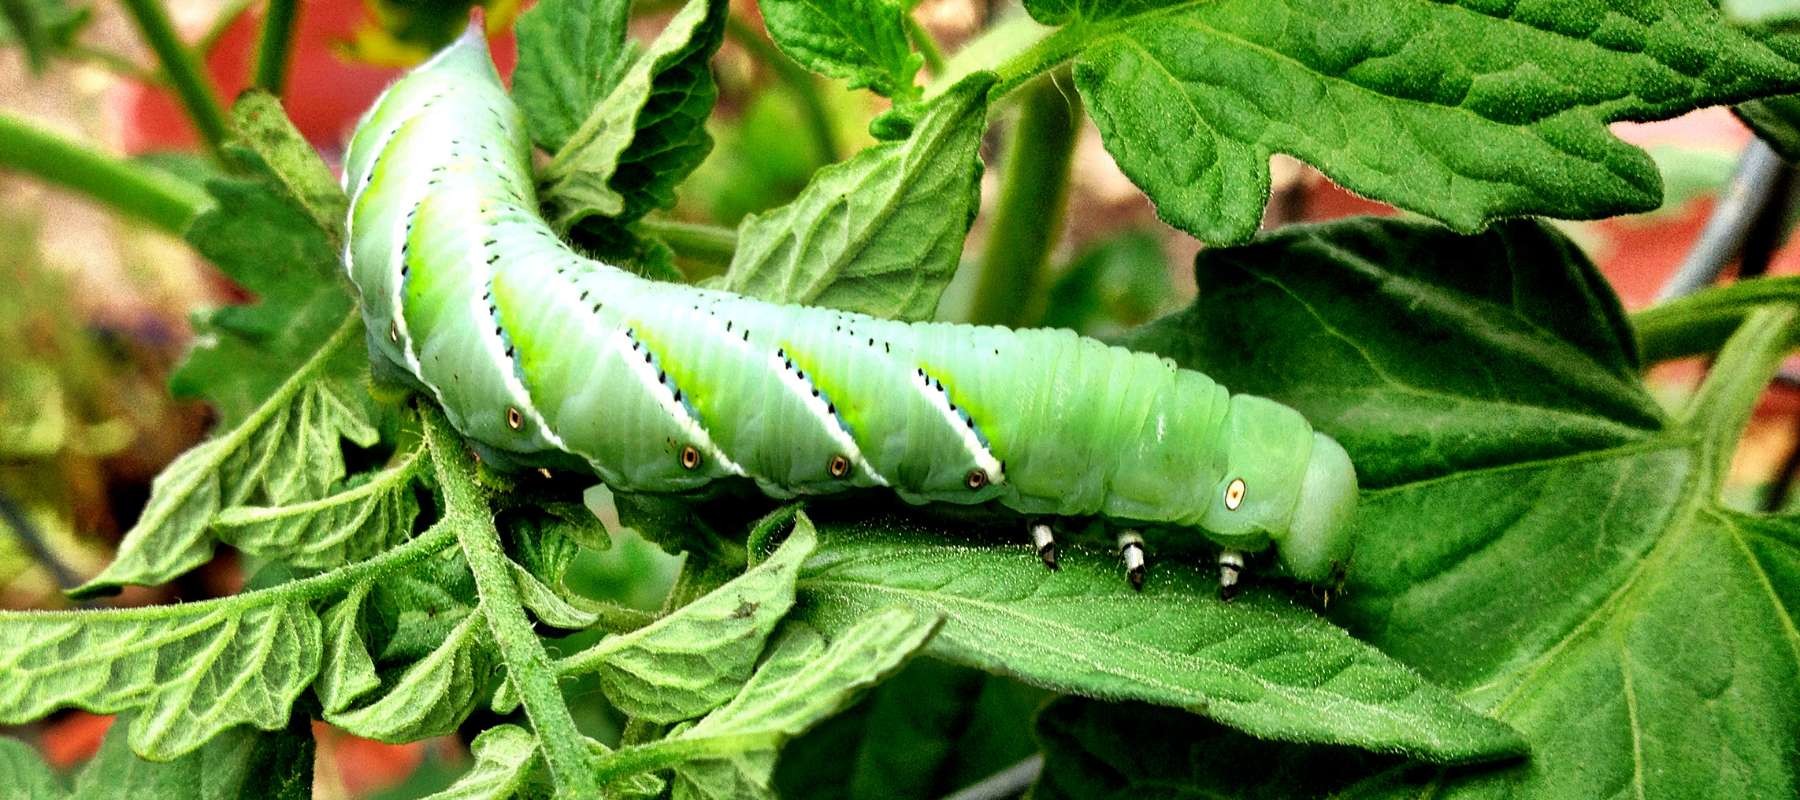 Our Top 3 Garden Pests and How to Deal With Them